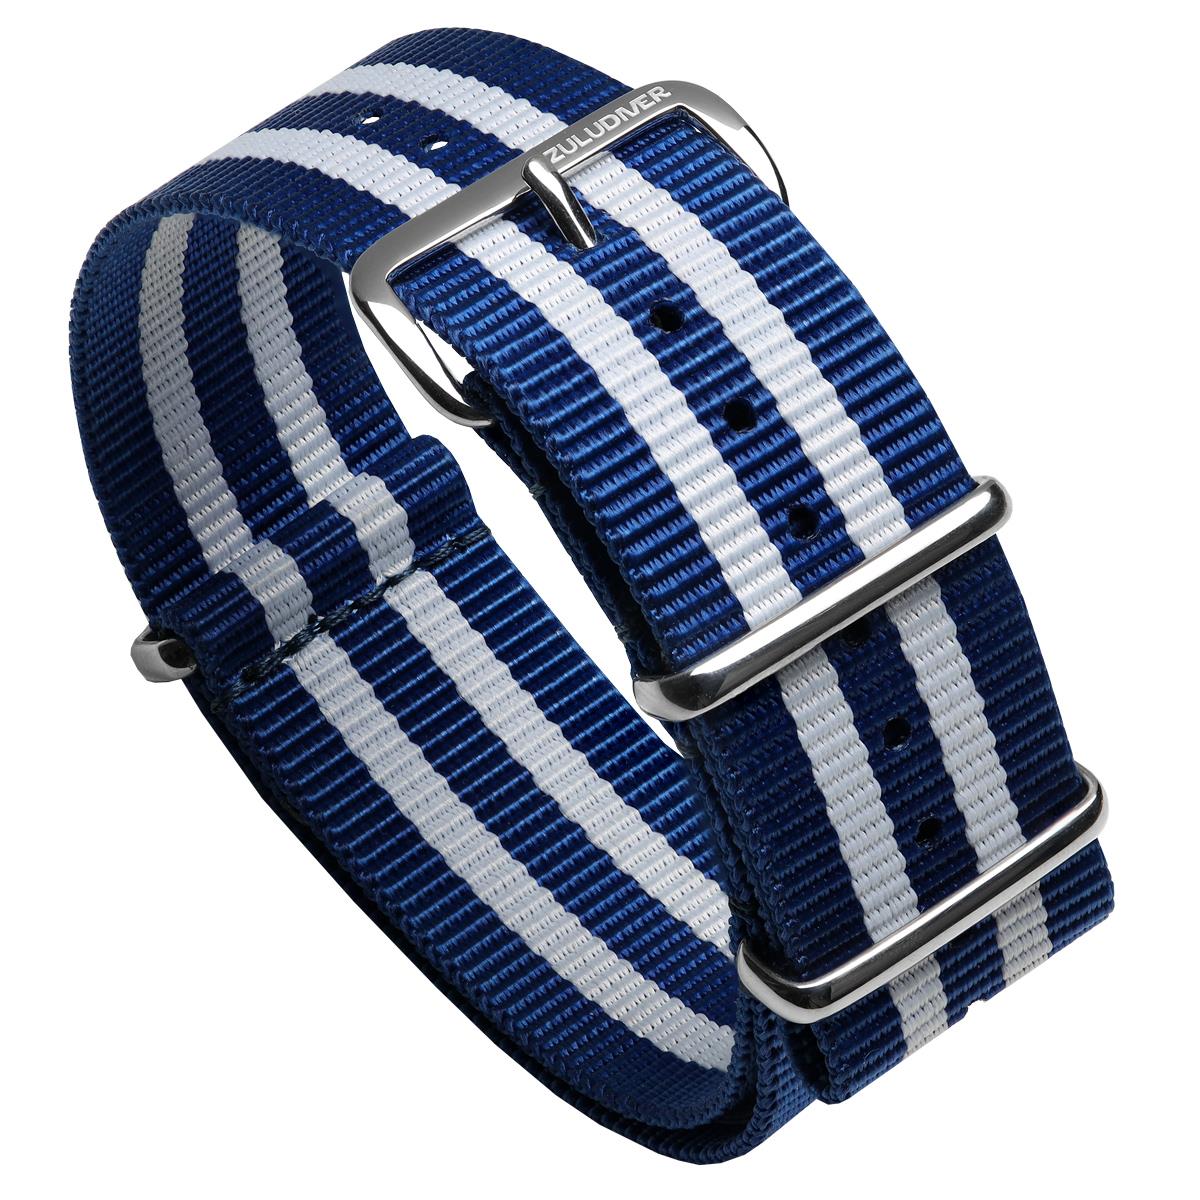 The National Lobster Hatchery Charity Military Nylon Watch Strap